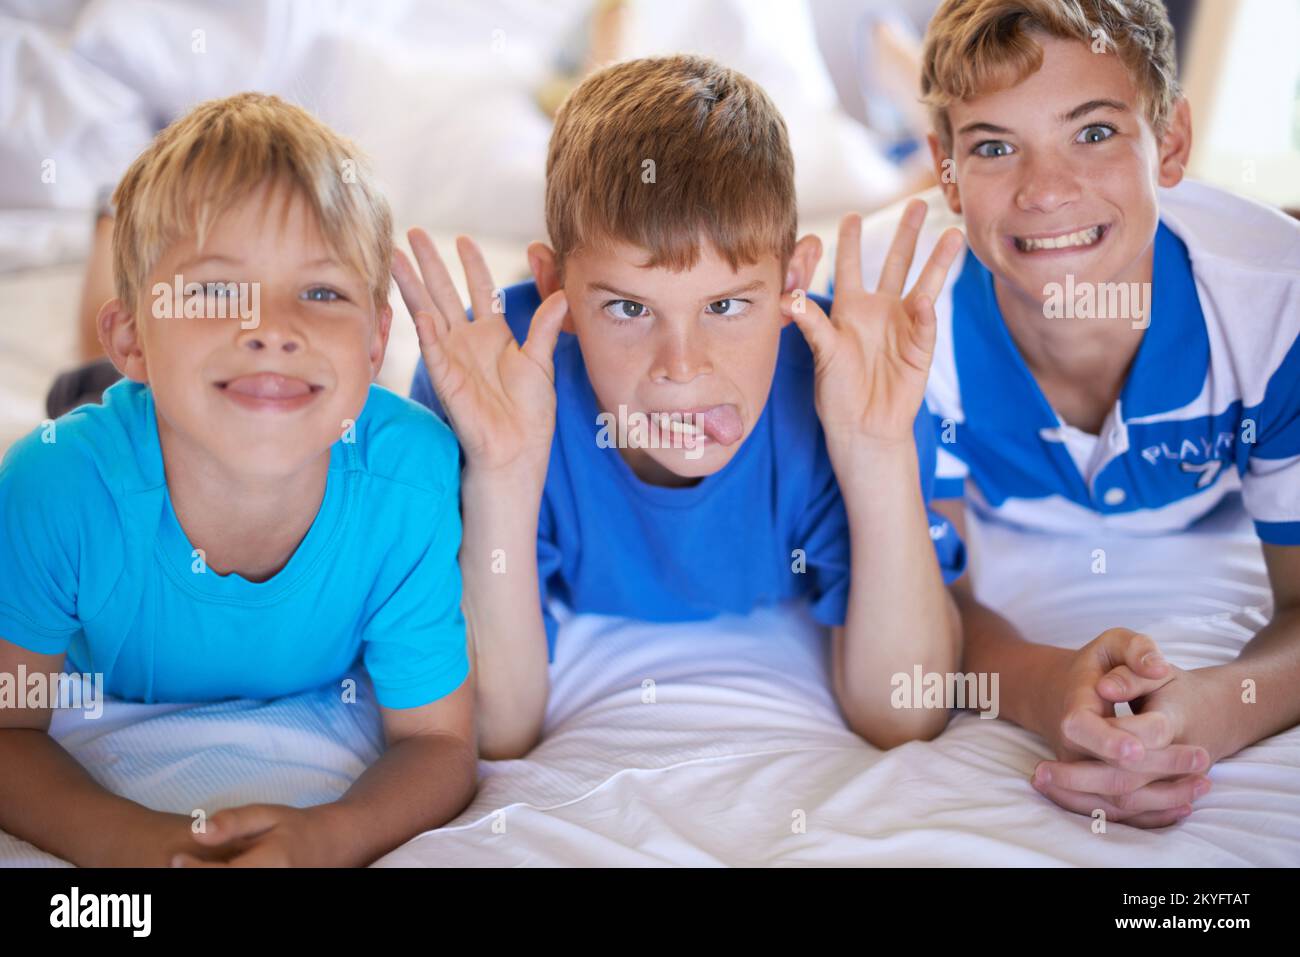 Boys will be boys. Three brothers pulling funny faces at the camera. Stock Photo